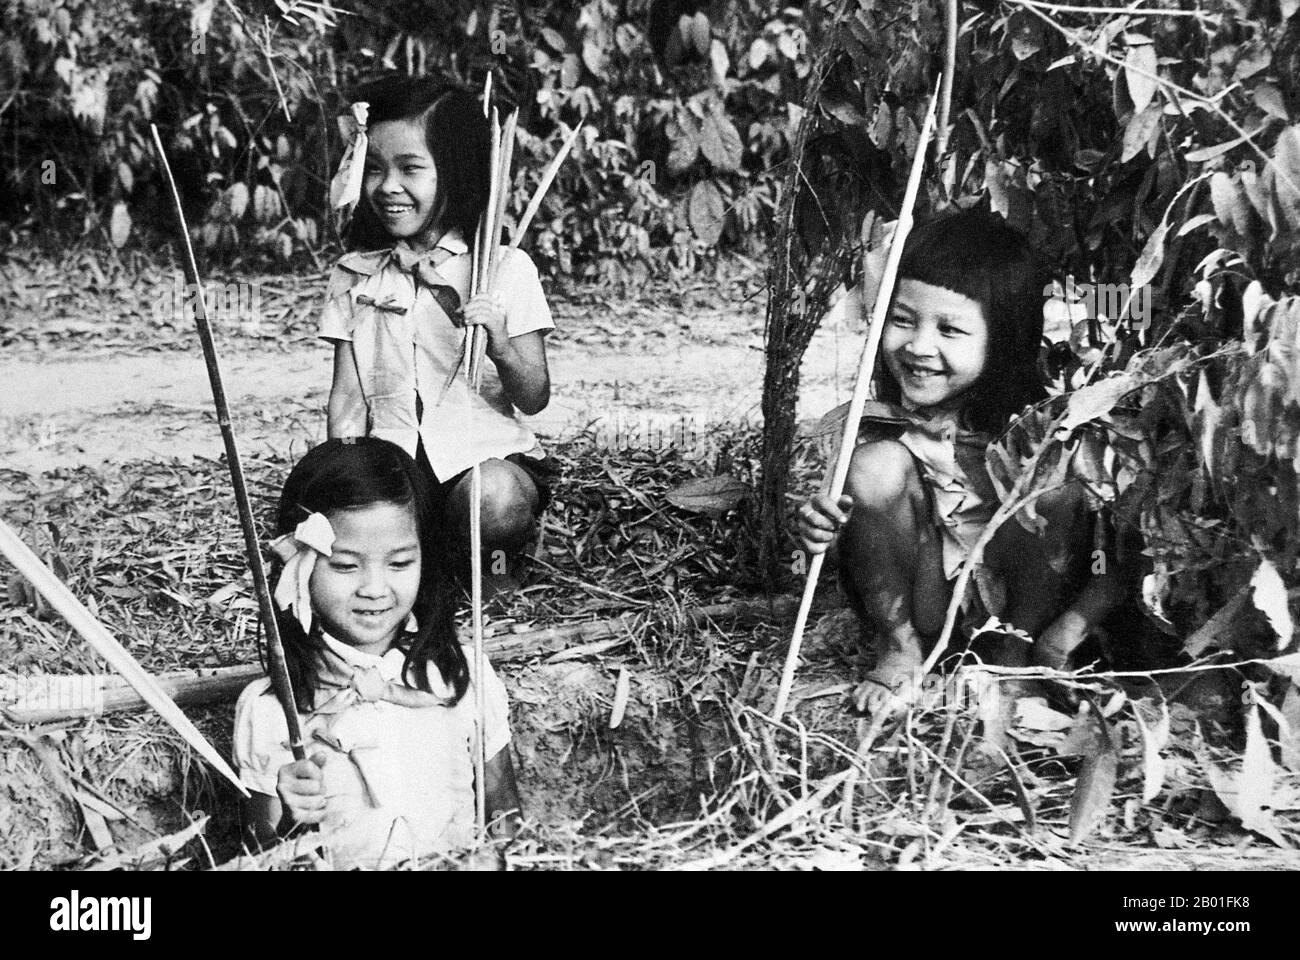 Vietnam: Vietnamese children making panji bamboo traps at Cu Chi, 1968.  The Second Indochina War, known in America as the Vietnam War, was a Cold War era military conflict that occurred in Vietnam, Laos, and Cambodia from 1 November 1955 to the fall of Saigon on 30 April 1975. This war followed the First Indochina War and was fought between North Vietnam, supported by its communist allies, and the government of South Vietnam, supported by the U.S. and other anti-communist nations. The U.S. government viewed involvement in the war as a way to prevent a communist takeover of South Vietnam. Stock Photo